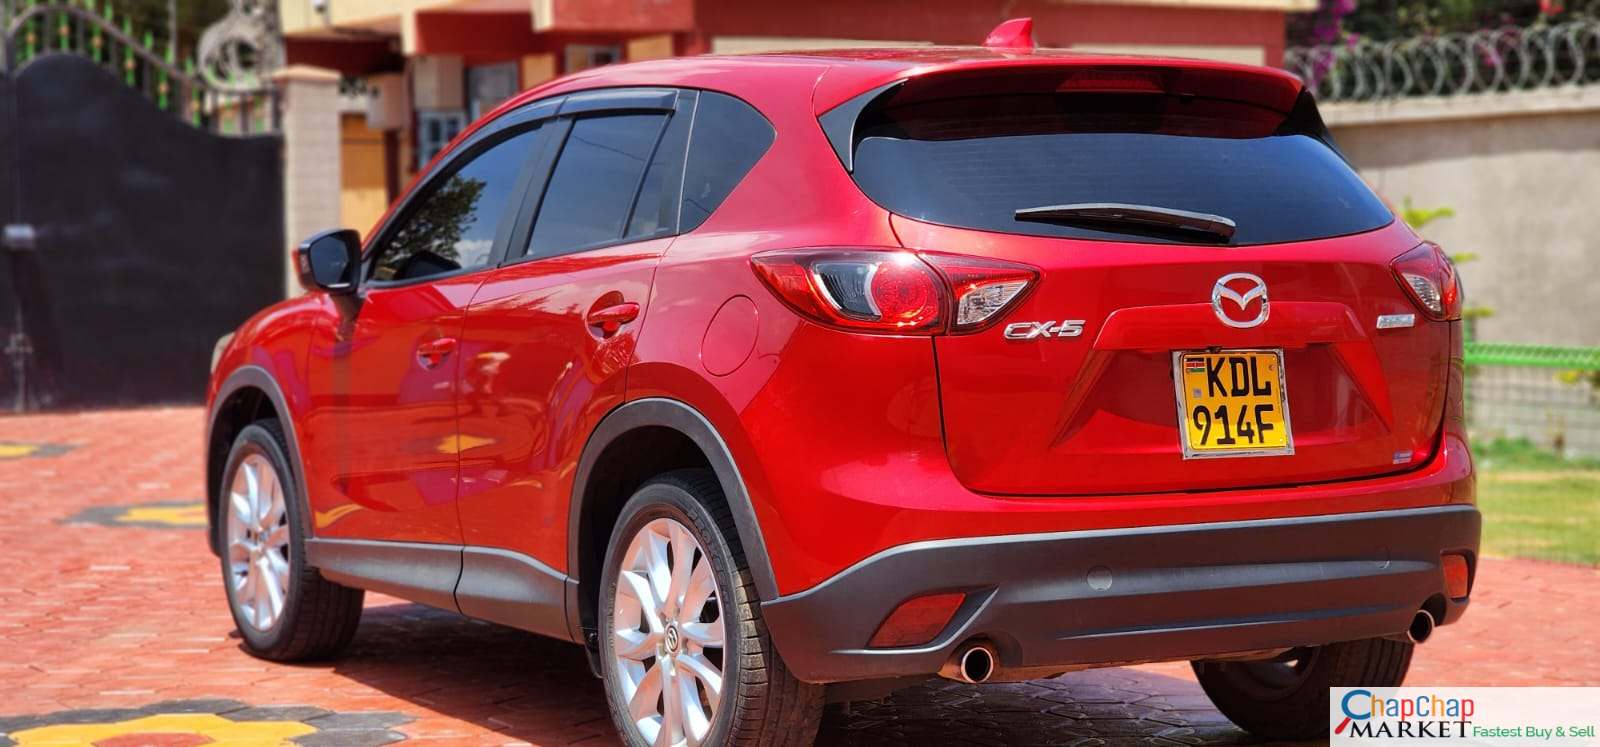 Mazda CX-5 CX5 kenya You Pay 20% DEPOSIT TRADE IN OK cx5 for sale in kenya hire purchase installments EXCLUSIVE